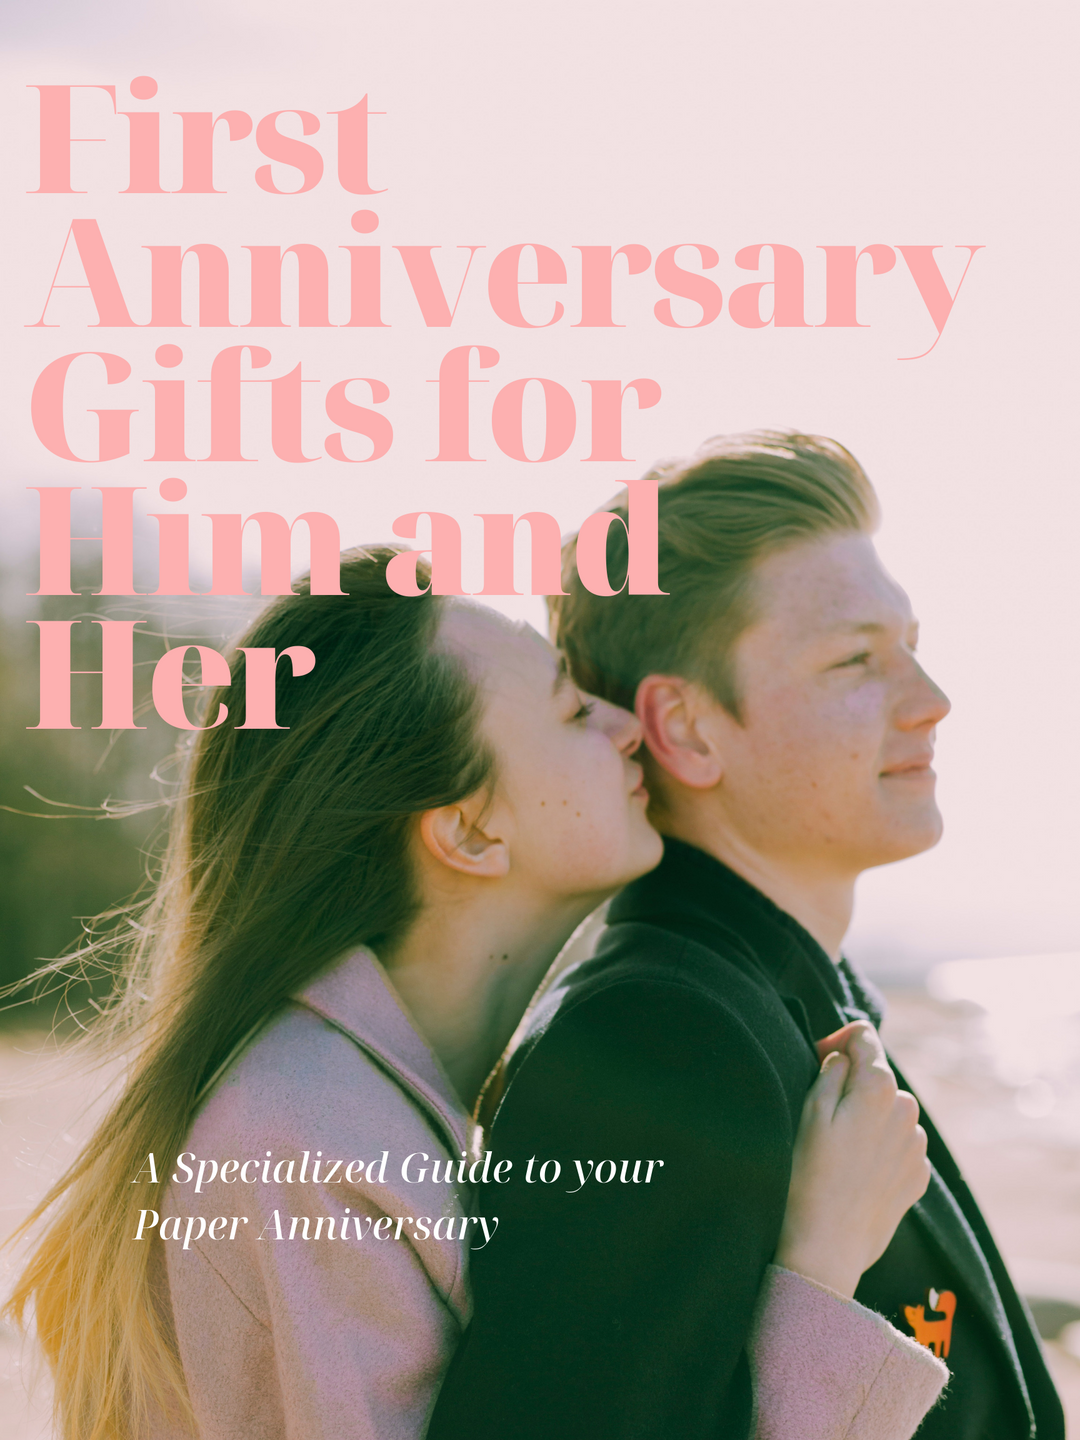 1st Anniversary Gifts for Him and Her